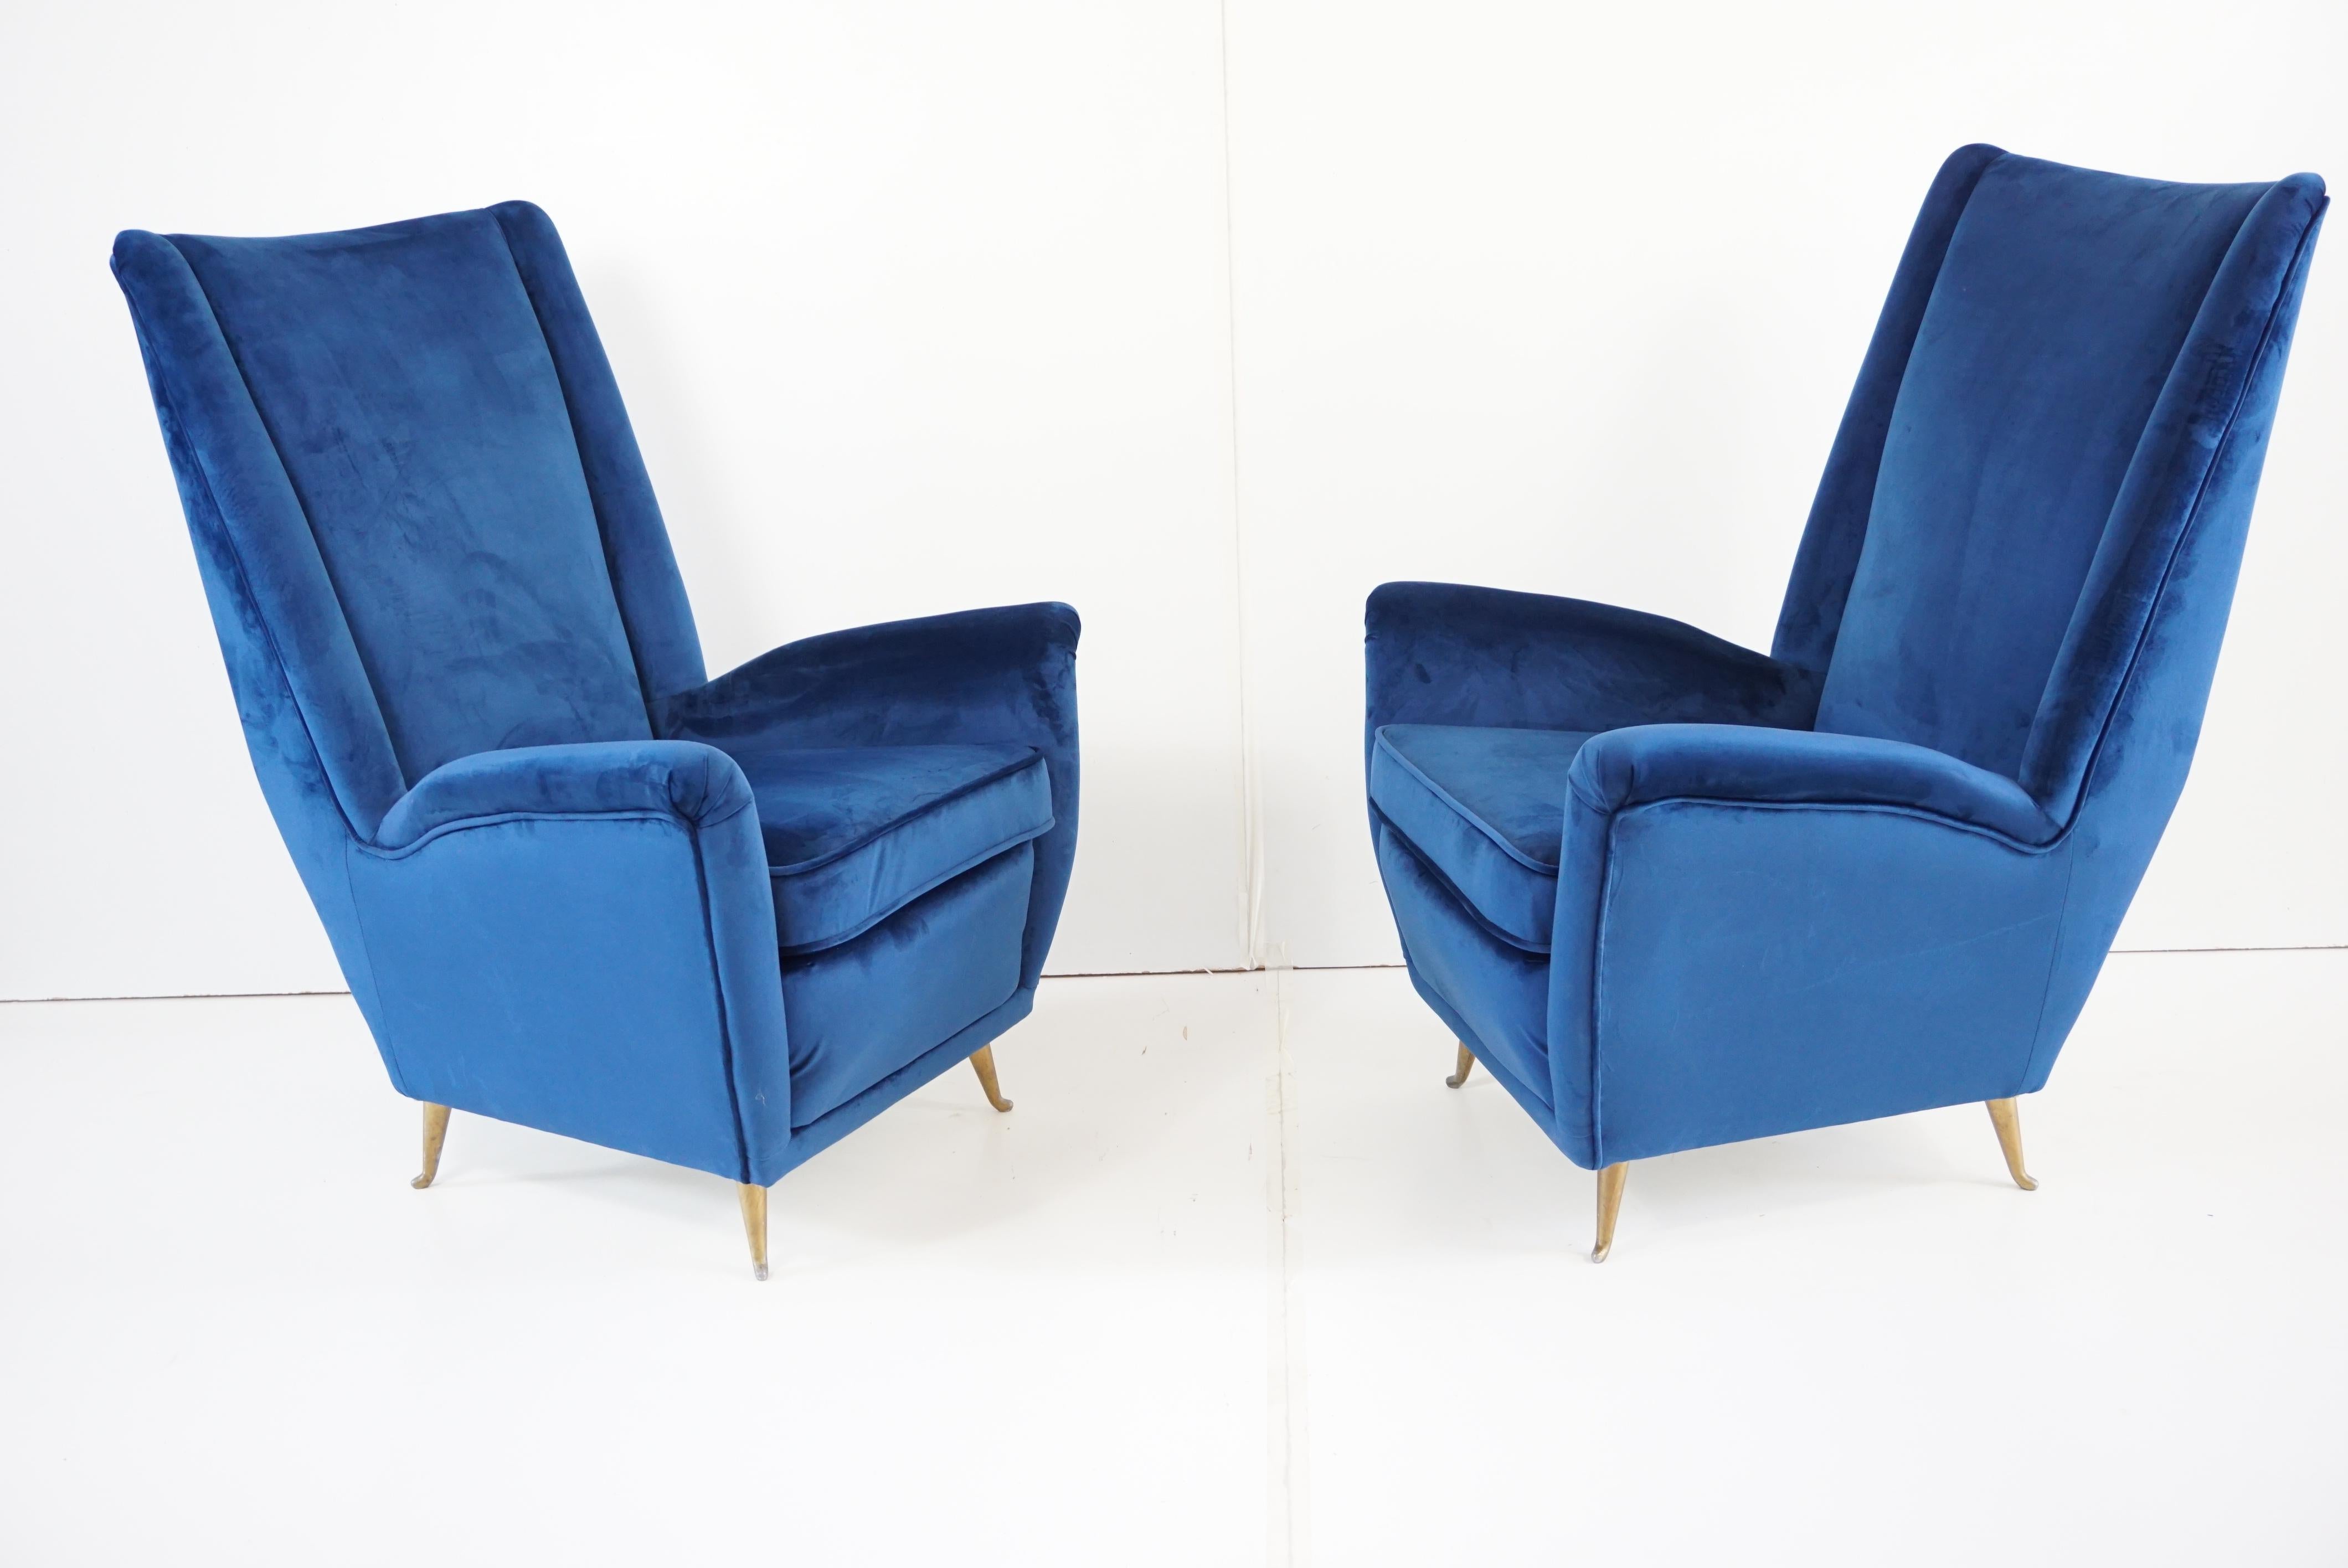 Pair of blu velvet GIO PONTI bergere armchair, manufactured by ISA Arredamenti Bergamo, circa 1950.
This model designed by Gio Ponti in the late 40s was manufactured by Cassina with number 